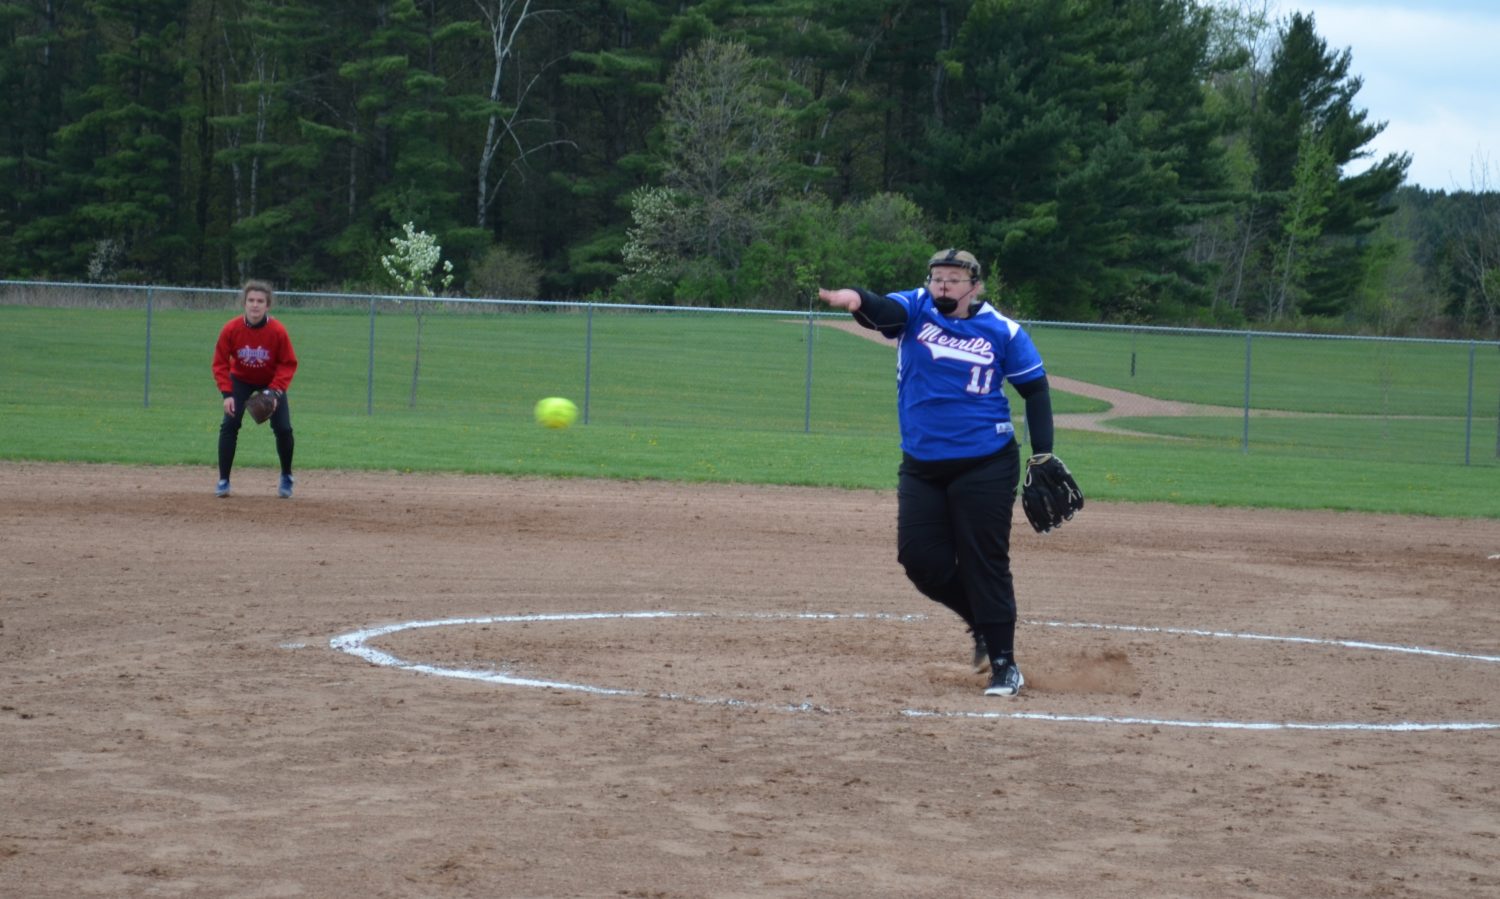 Wind and rain couldn’t stop Bluejay fast-pitchers